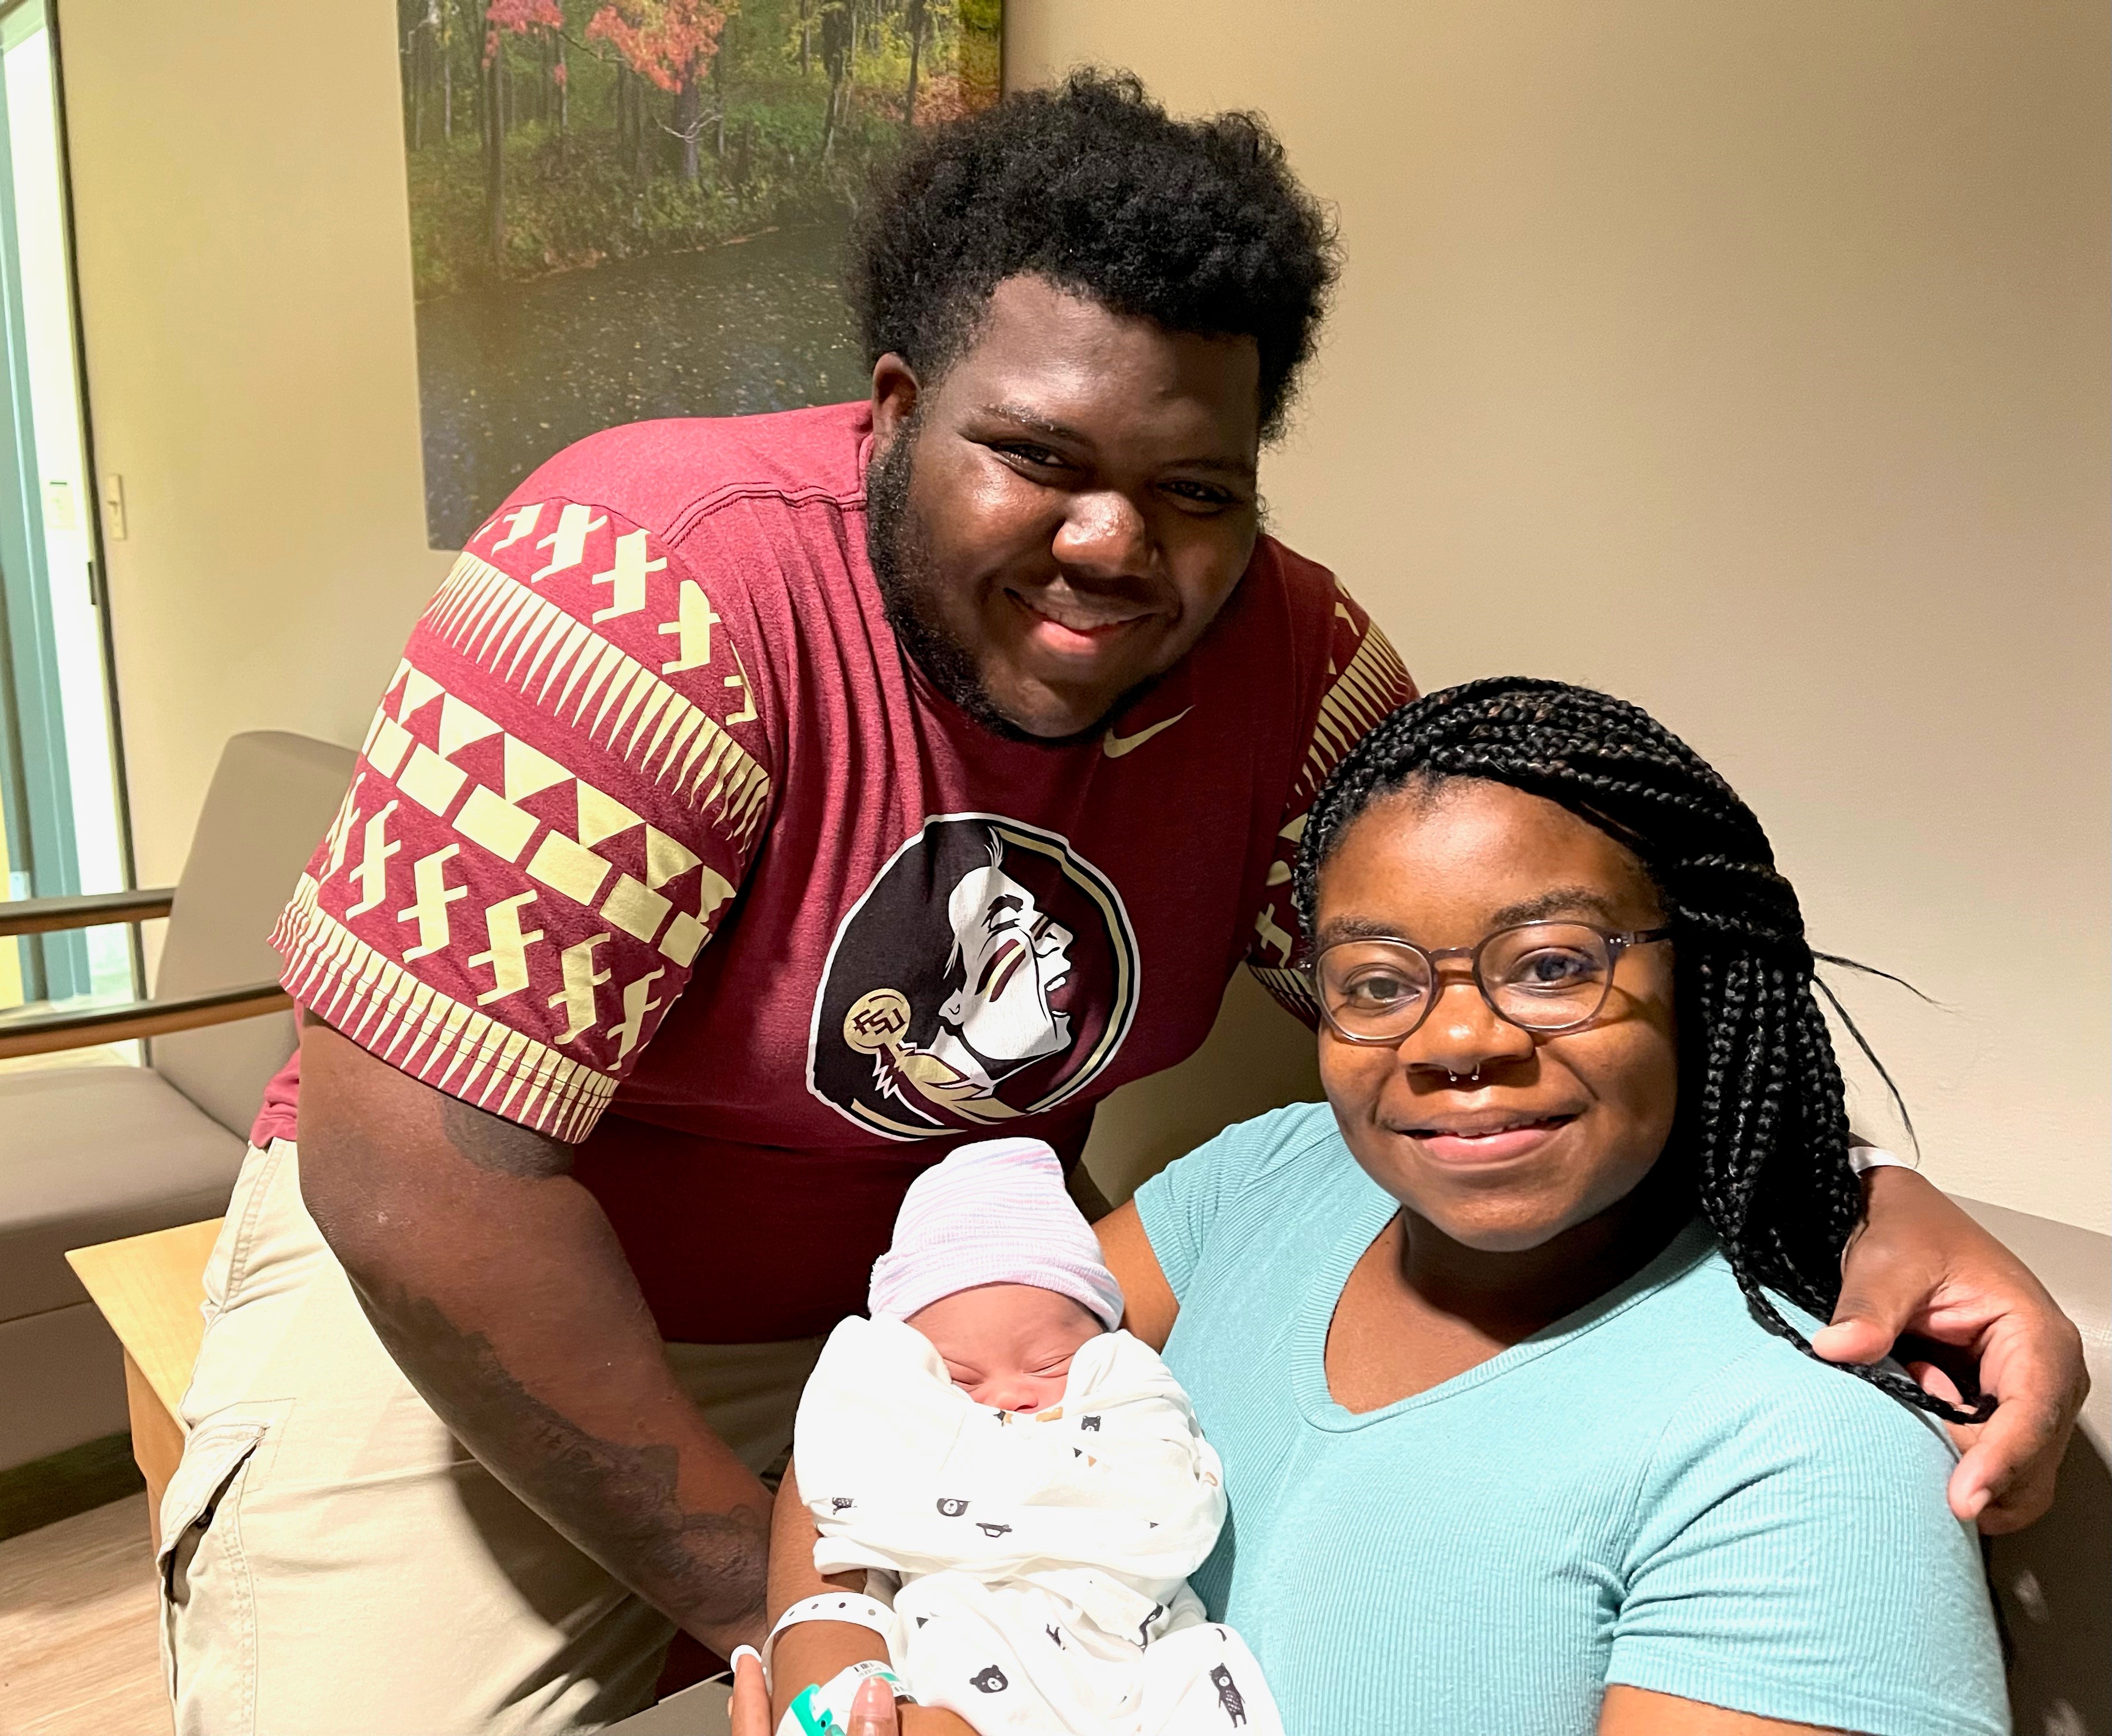 The Lane family is all smiles with their newest arrival, De’Andre Lewis Lane Jr., born on Father’s Day at HCA Florida Capital Hospital.